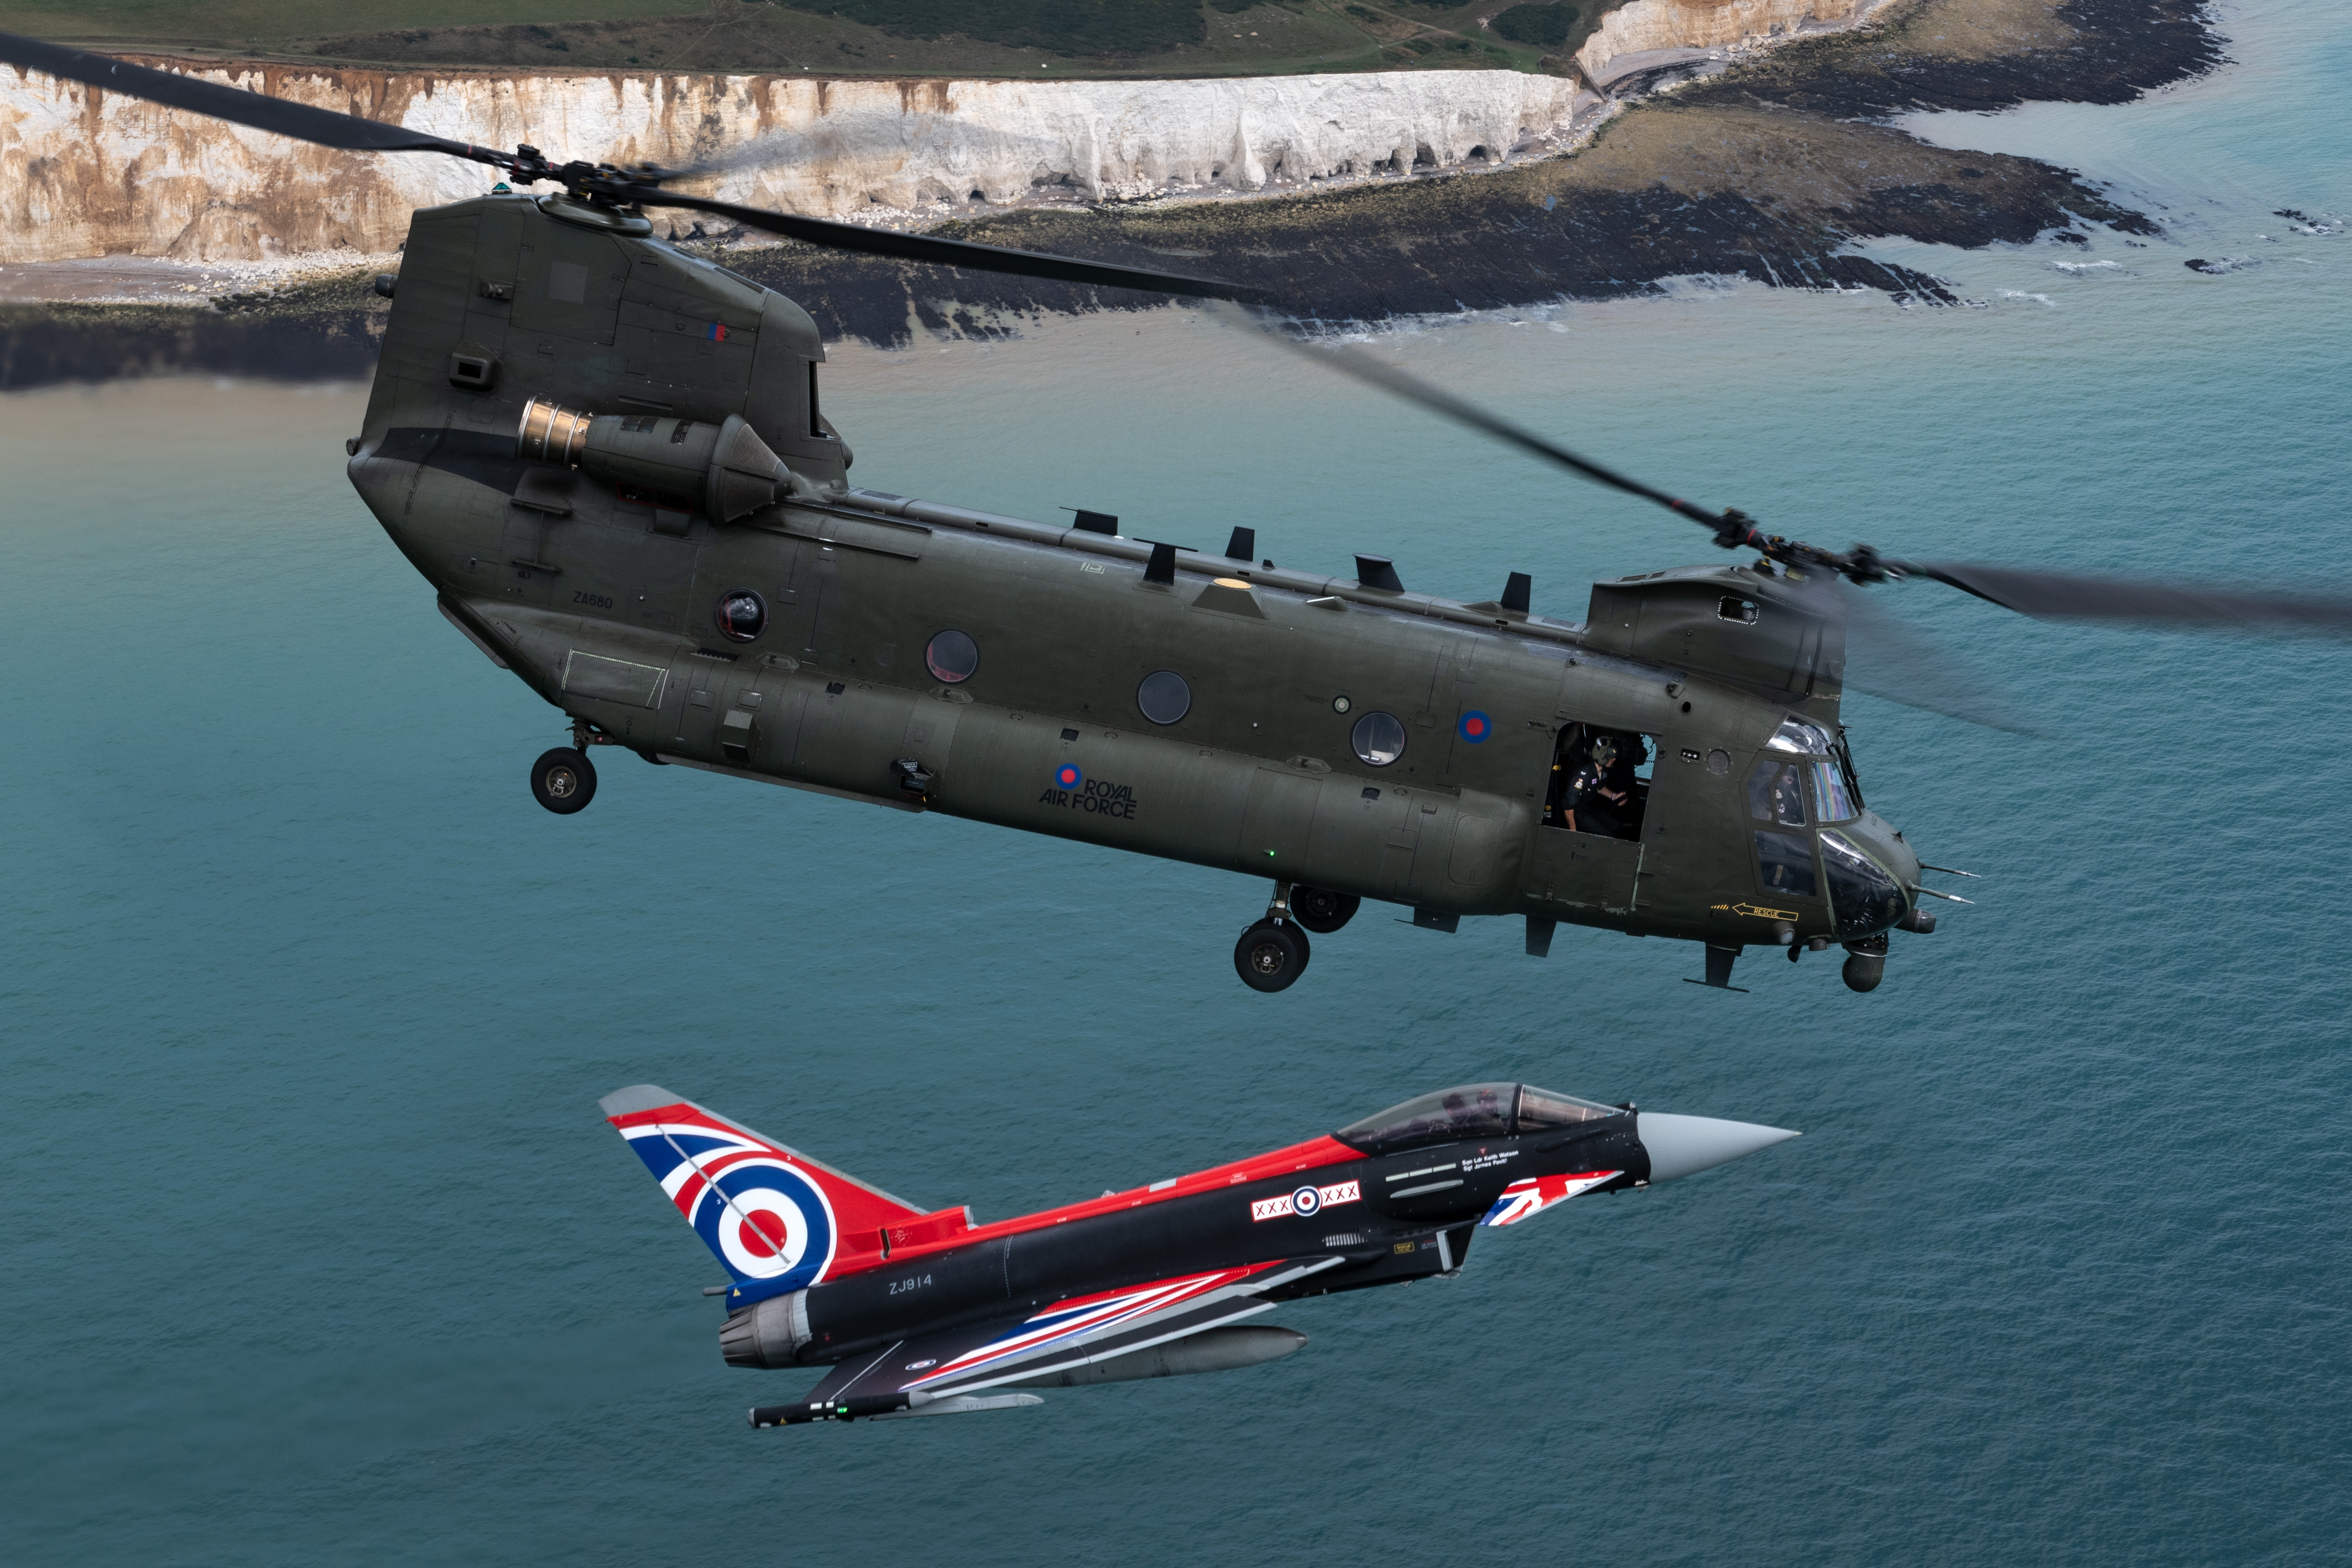 Image shows Chinook and Typhoon with Union Jack paint in flight over the white cliffs.